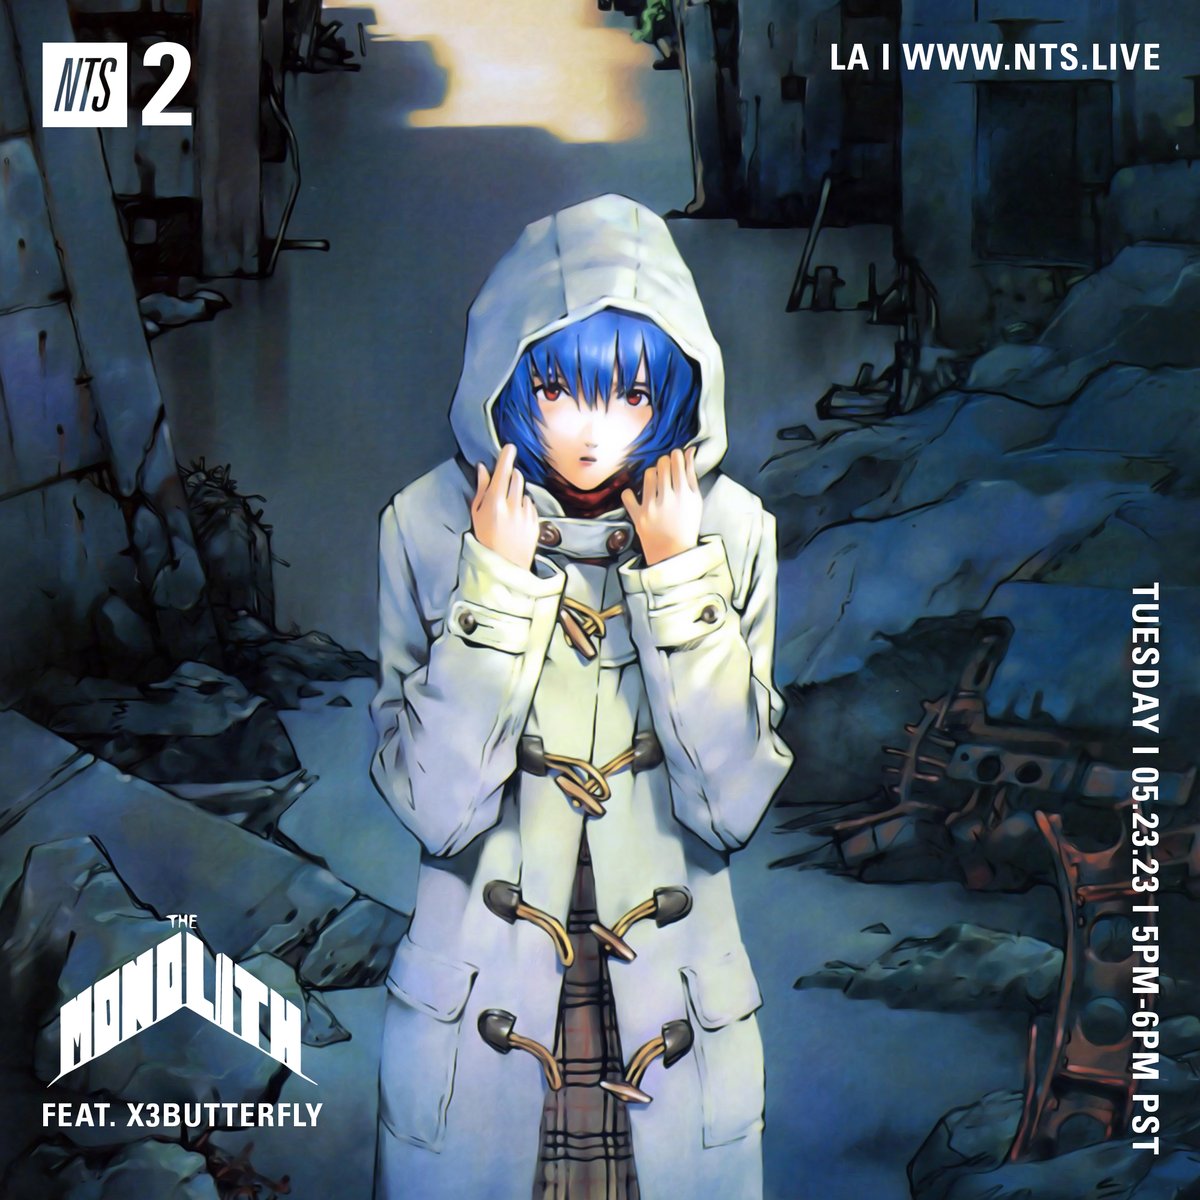 The Monolith w/ @paulpbdy and X3Butterfly for the next hour, live from LA. Tap in nts.live/2